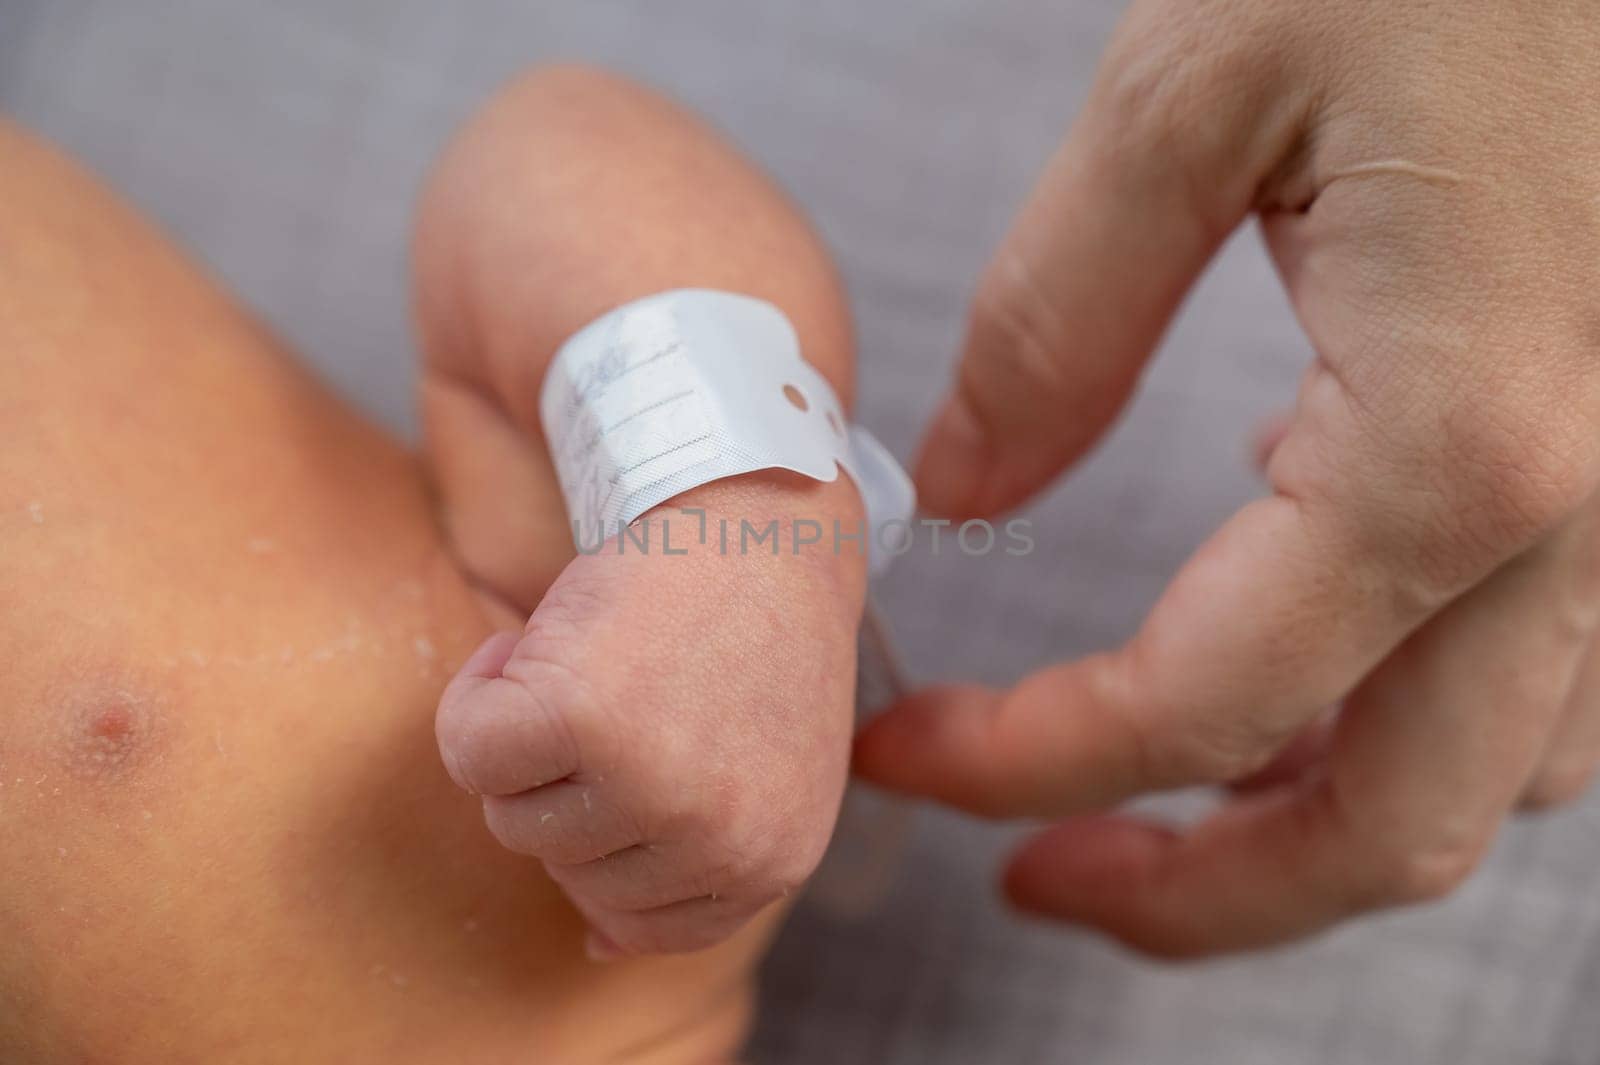 Woman holding newborn by tag on hand